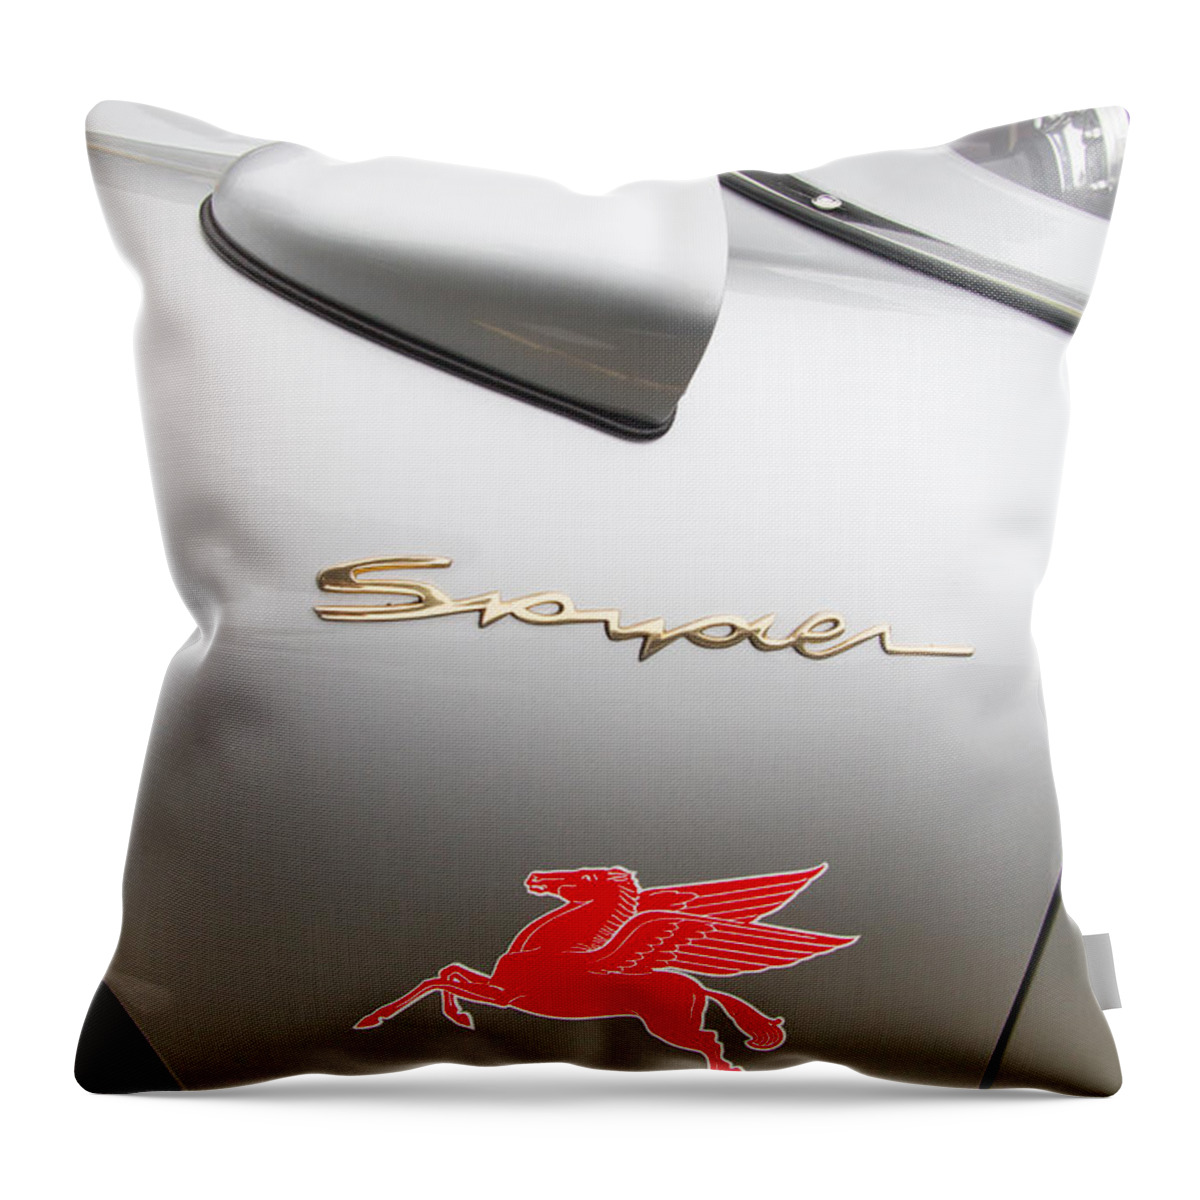 Porsche Spyder Throw Pillow featuring the photograph Porsche Spyder And The Flying Red Horse by Roger Mullenhour